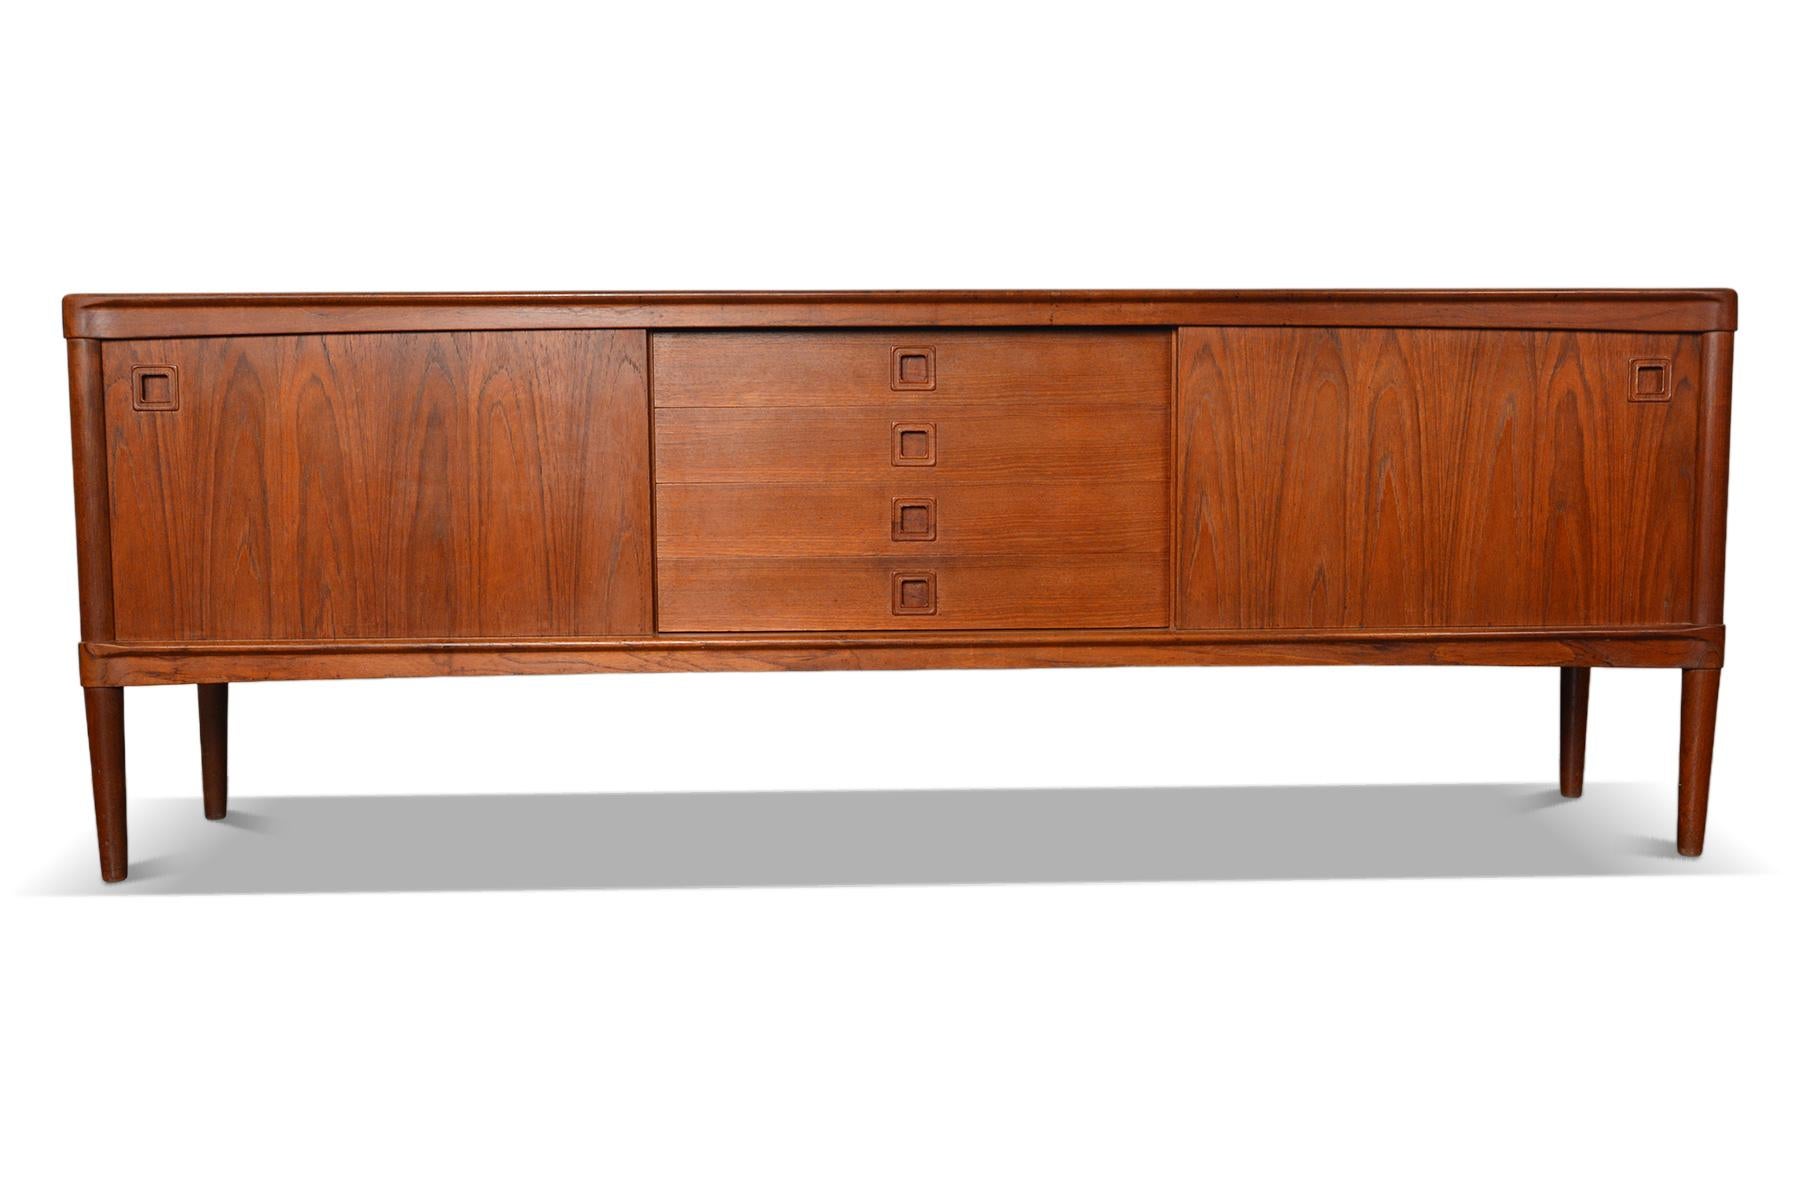 Square Pull Teak Credenza by h.w. Klein #1 For Sale 3